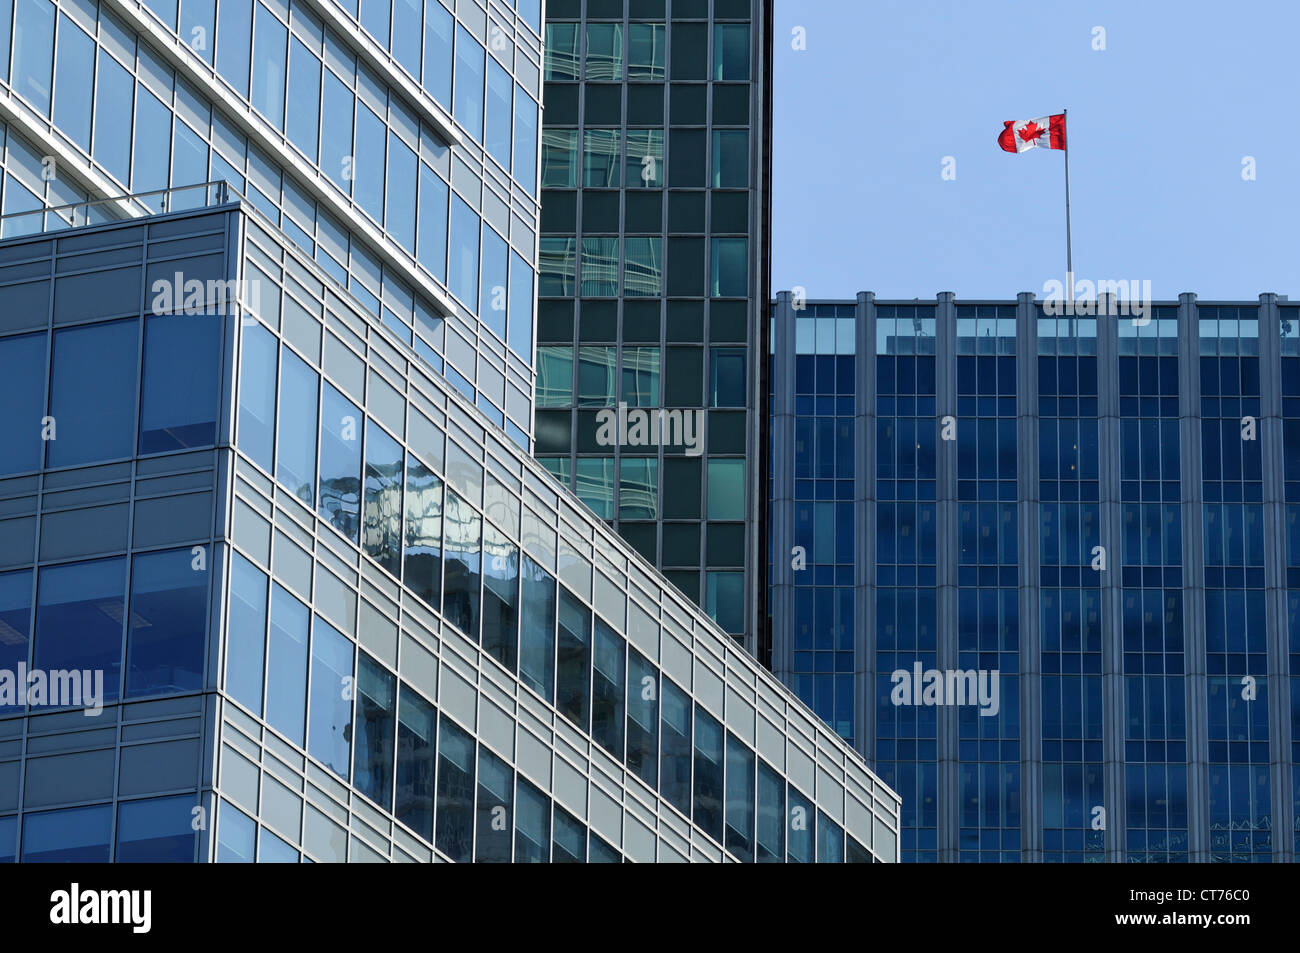 canadian flag waving on top of skyscraper in vancouver Stock Photo